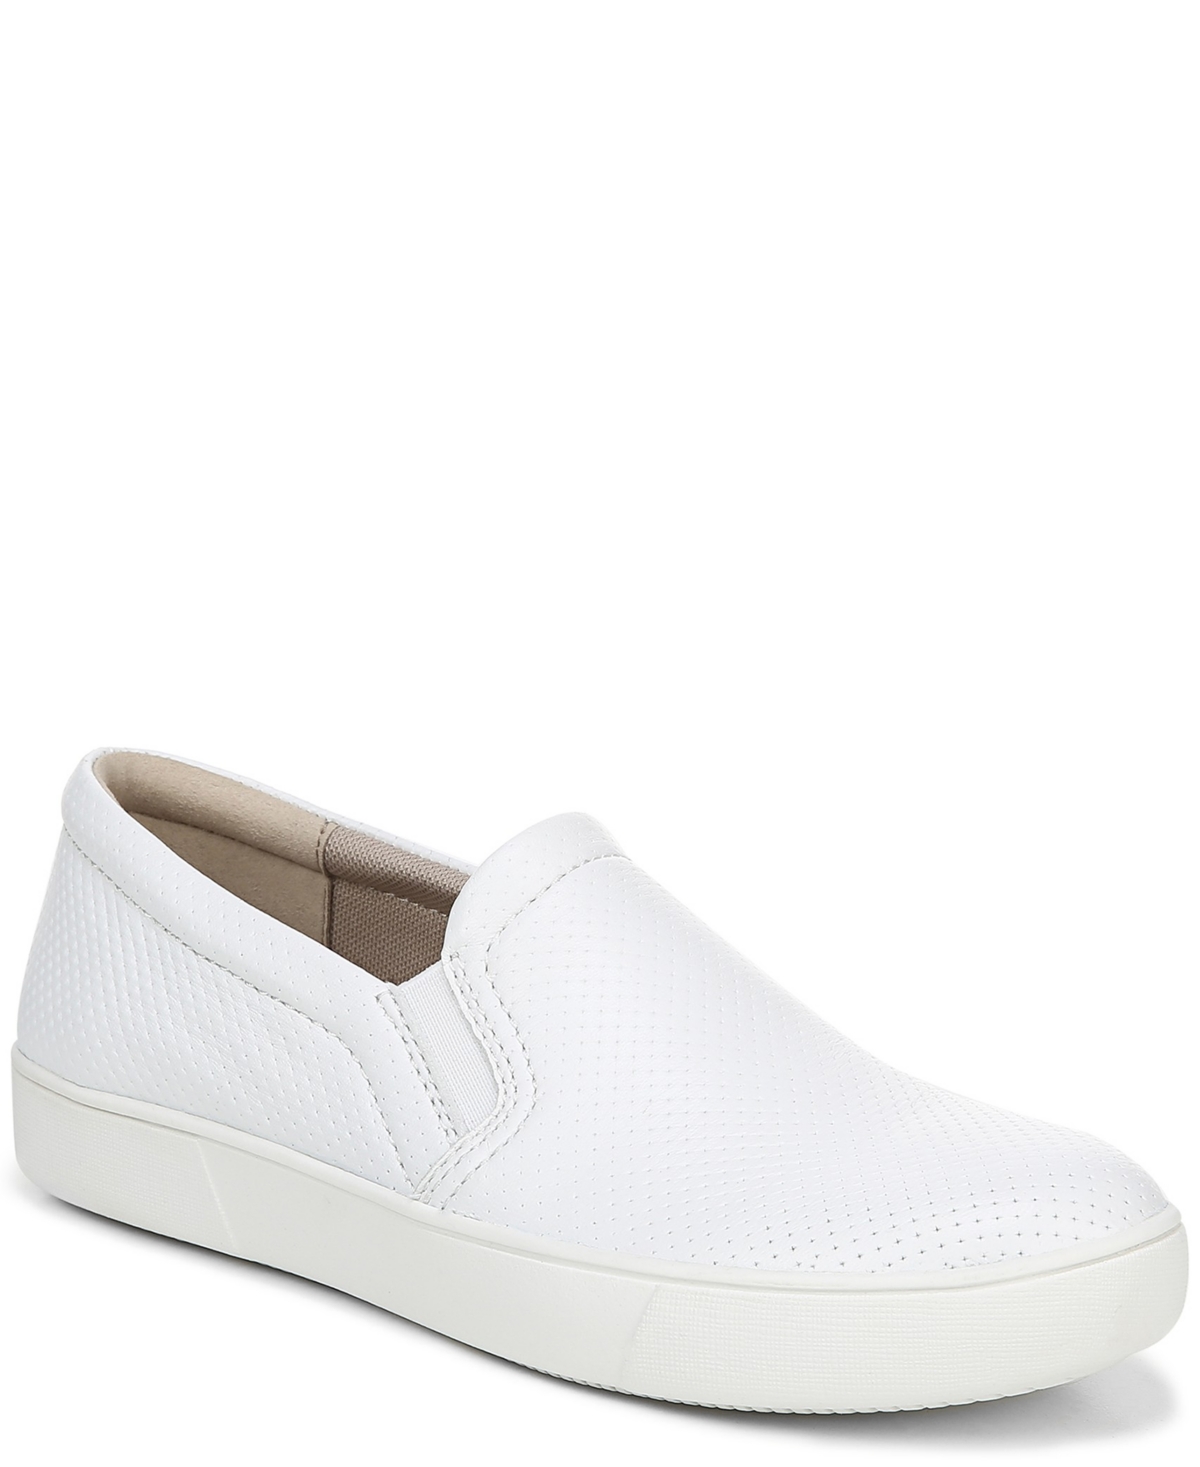 Marianne Slip-On Sneakers - White Leather